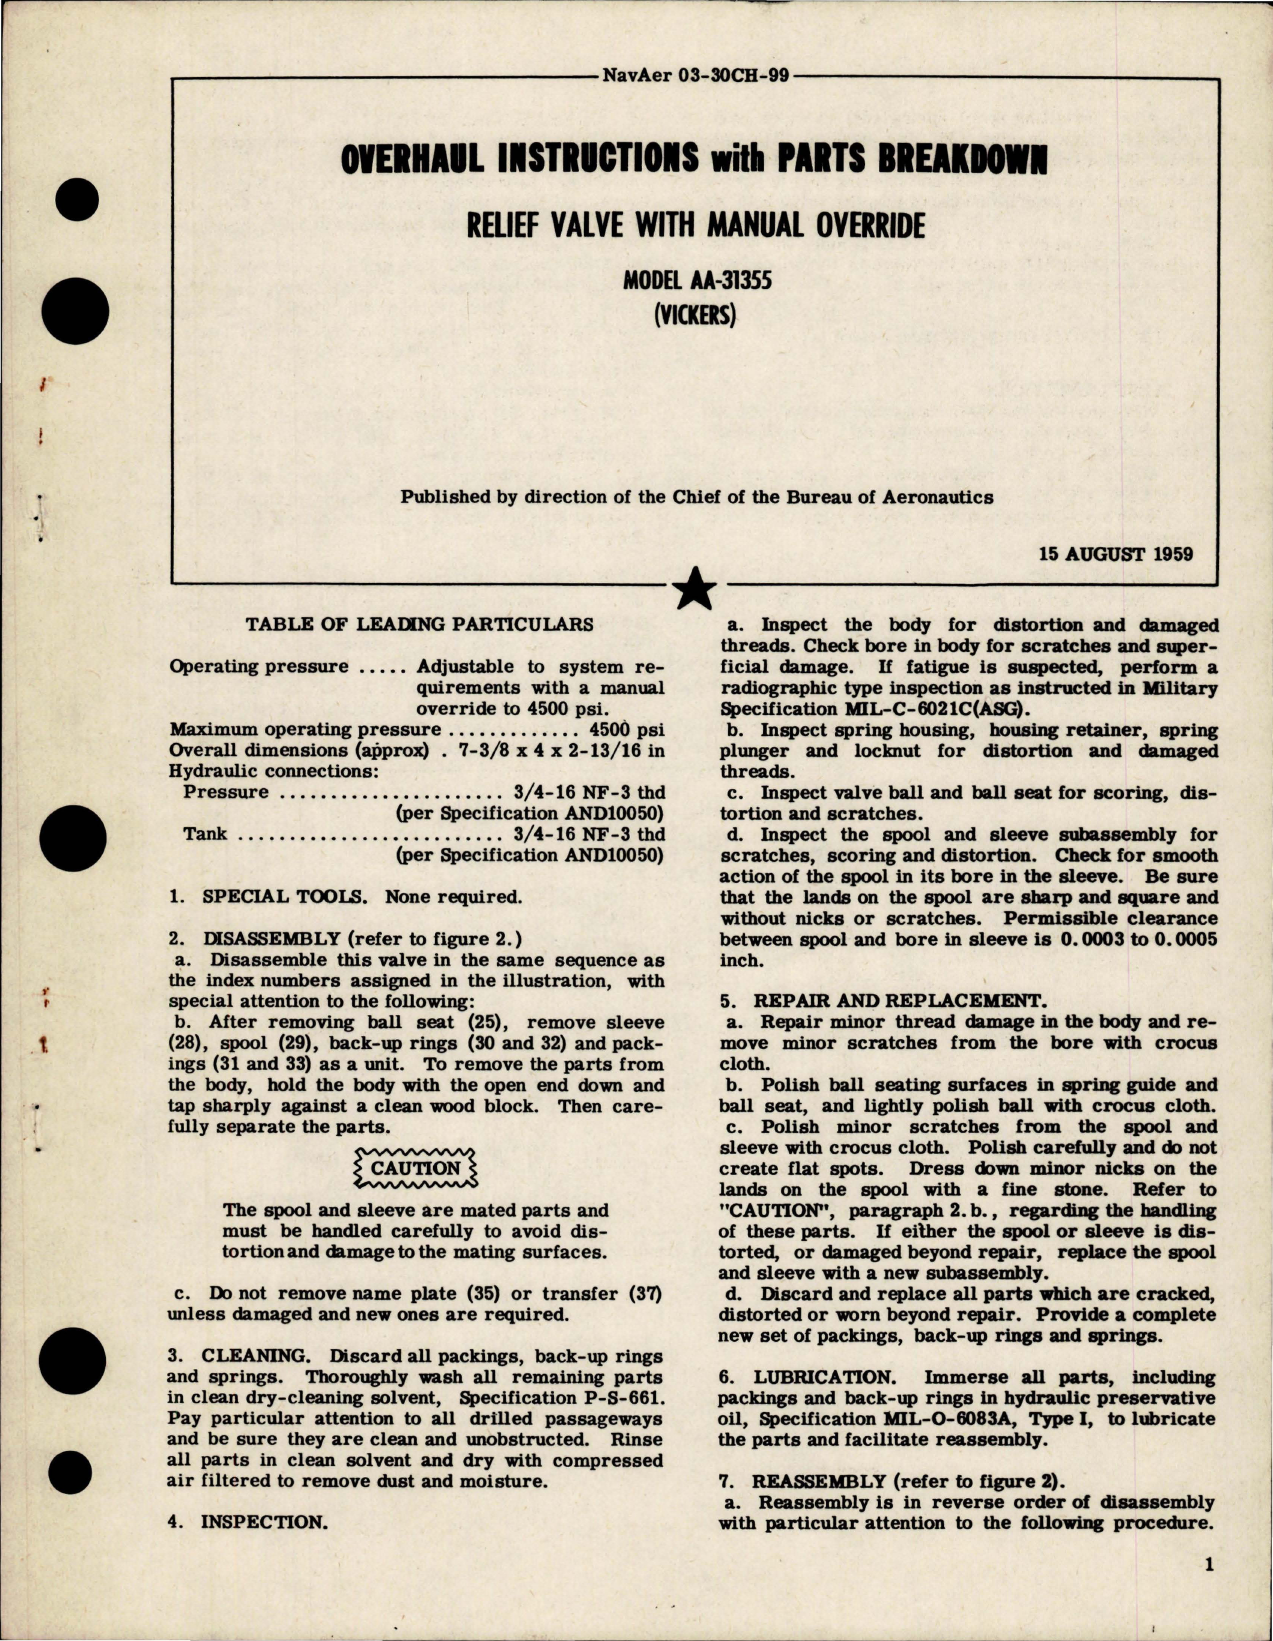 Sample page 1 from AirCorps Library document: Overhaul Instructions with Parts for Relief Valve with Manual Override - Model AA-31355 